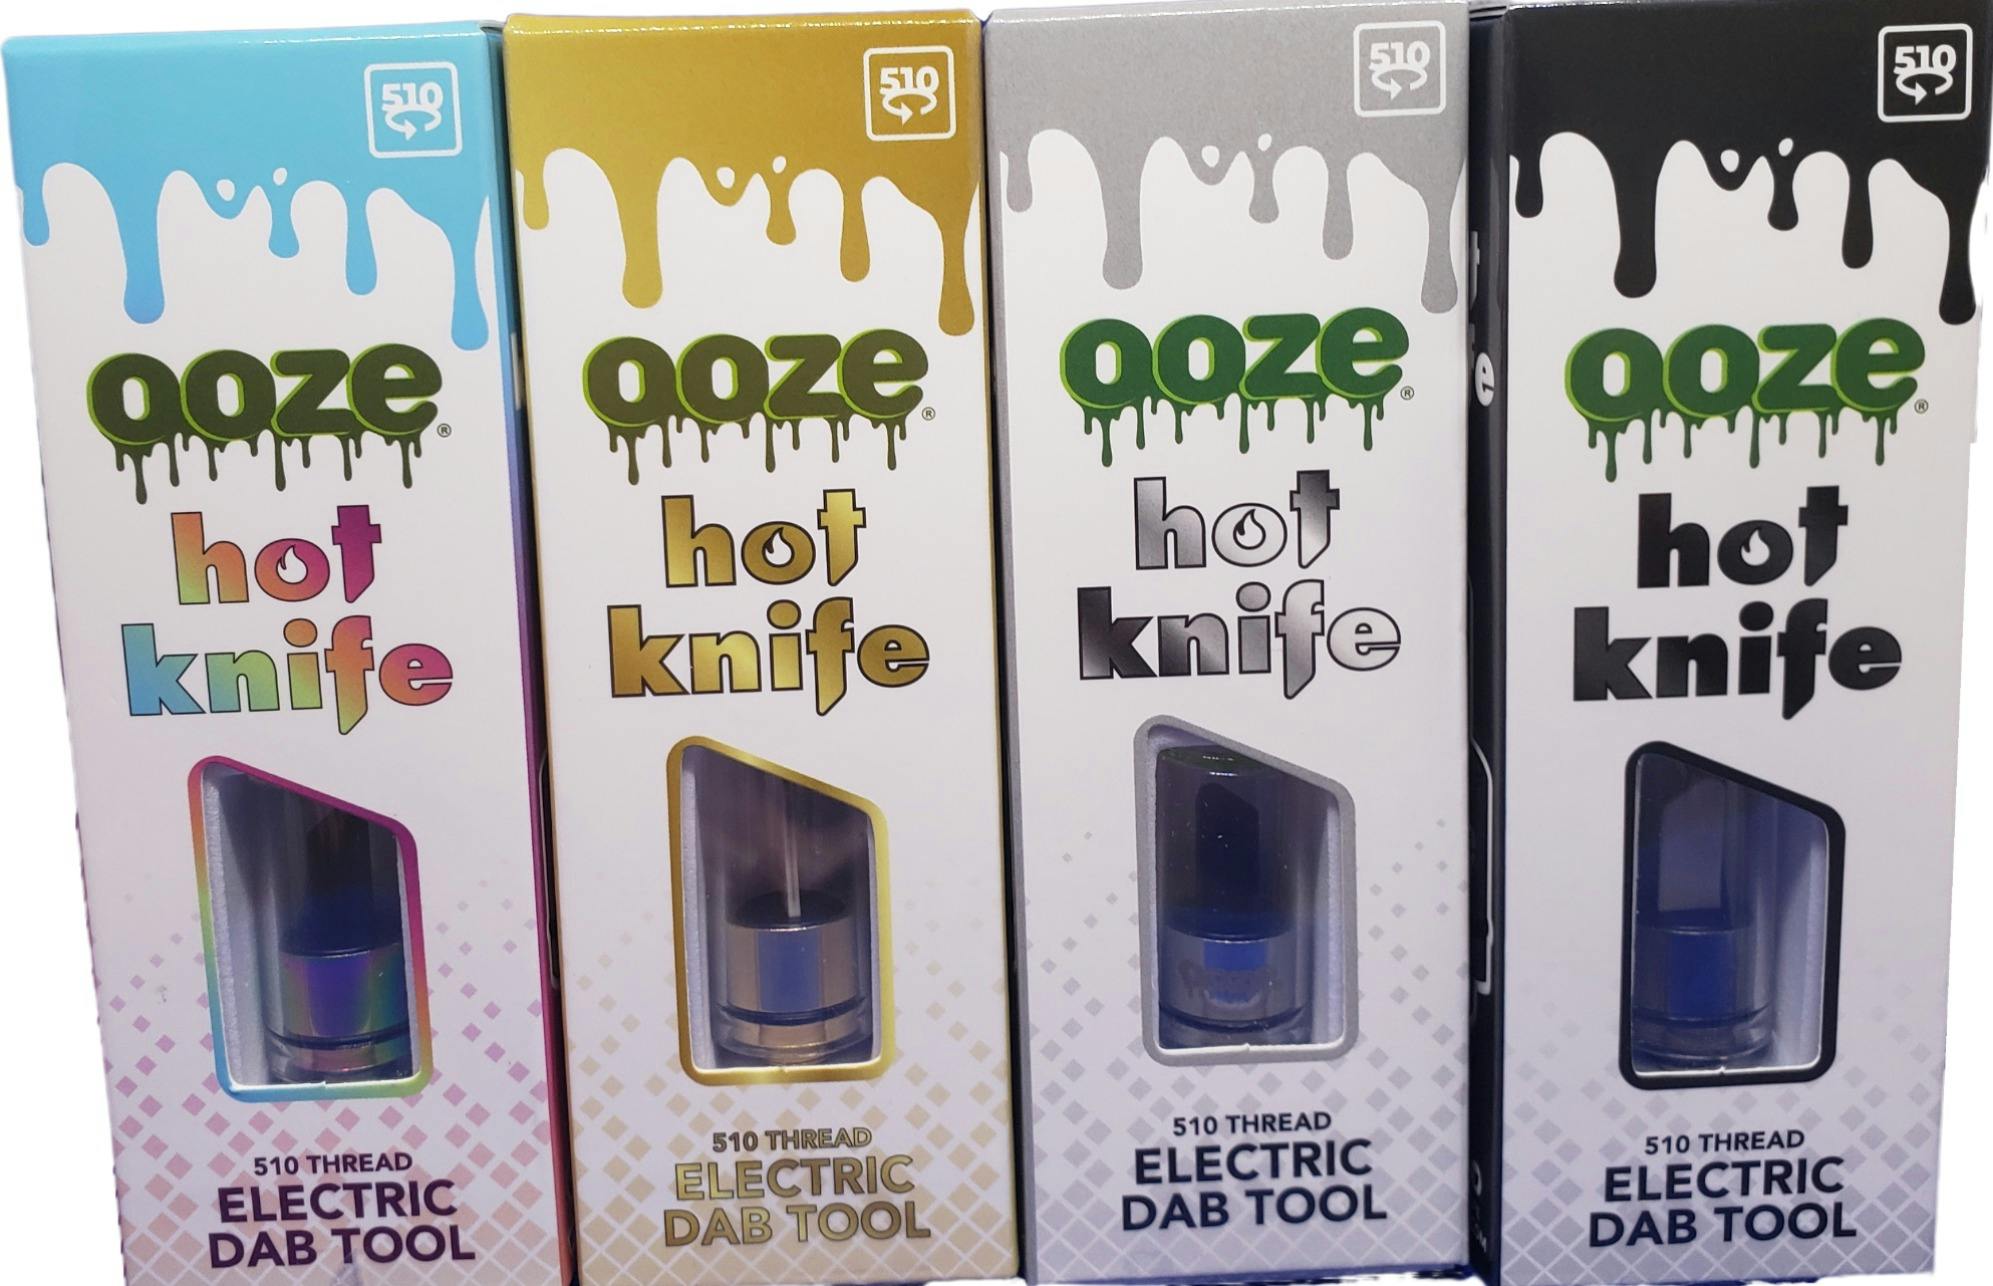 Ooze Hot Knife Electric Dab Tool